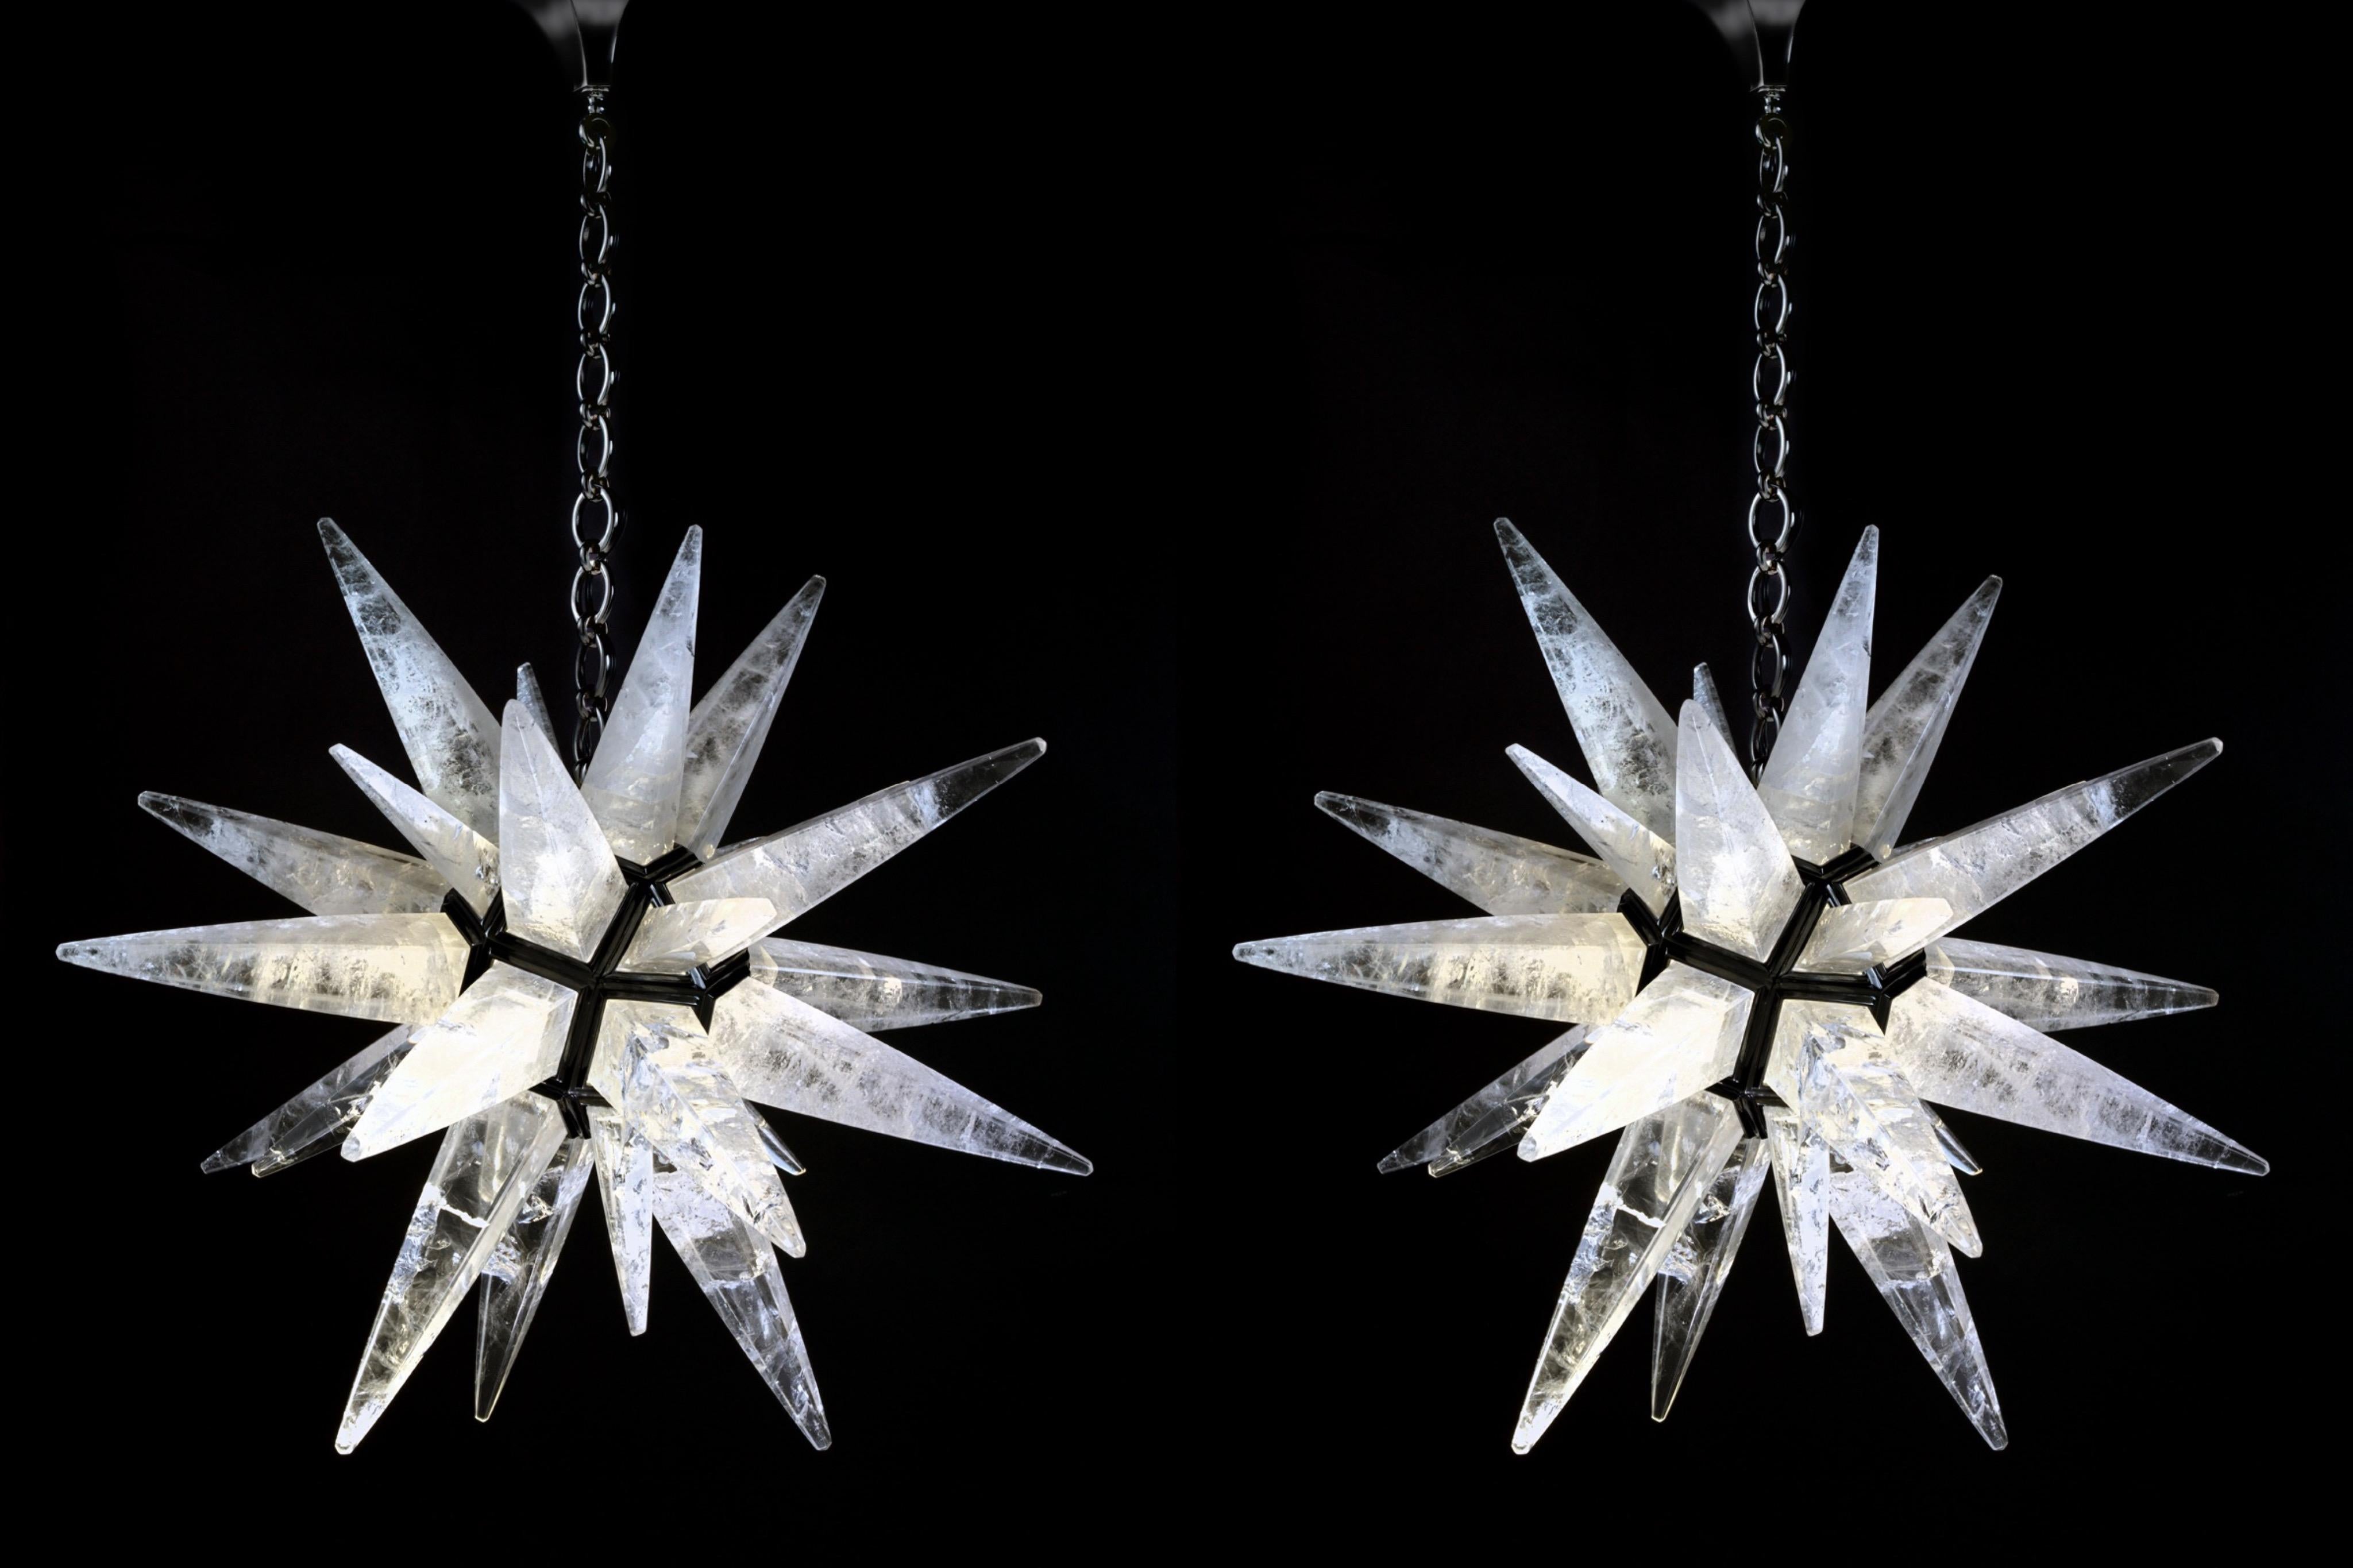 Rock crystal quartz star light black edition.
This rock crystal star lighting is made in France.
The fixture, the chain and the canopy of this rock crystal lighting are handmade in bronze.
This rock crystal light could be also customized in other